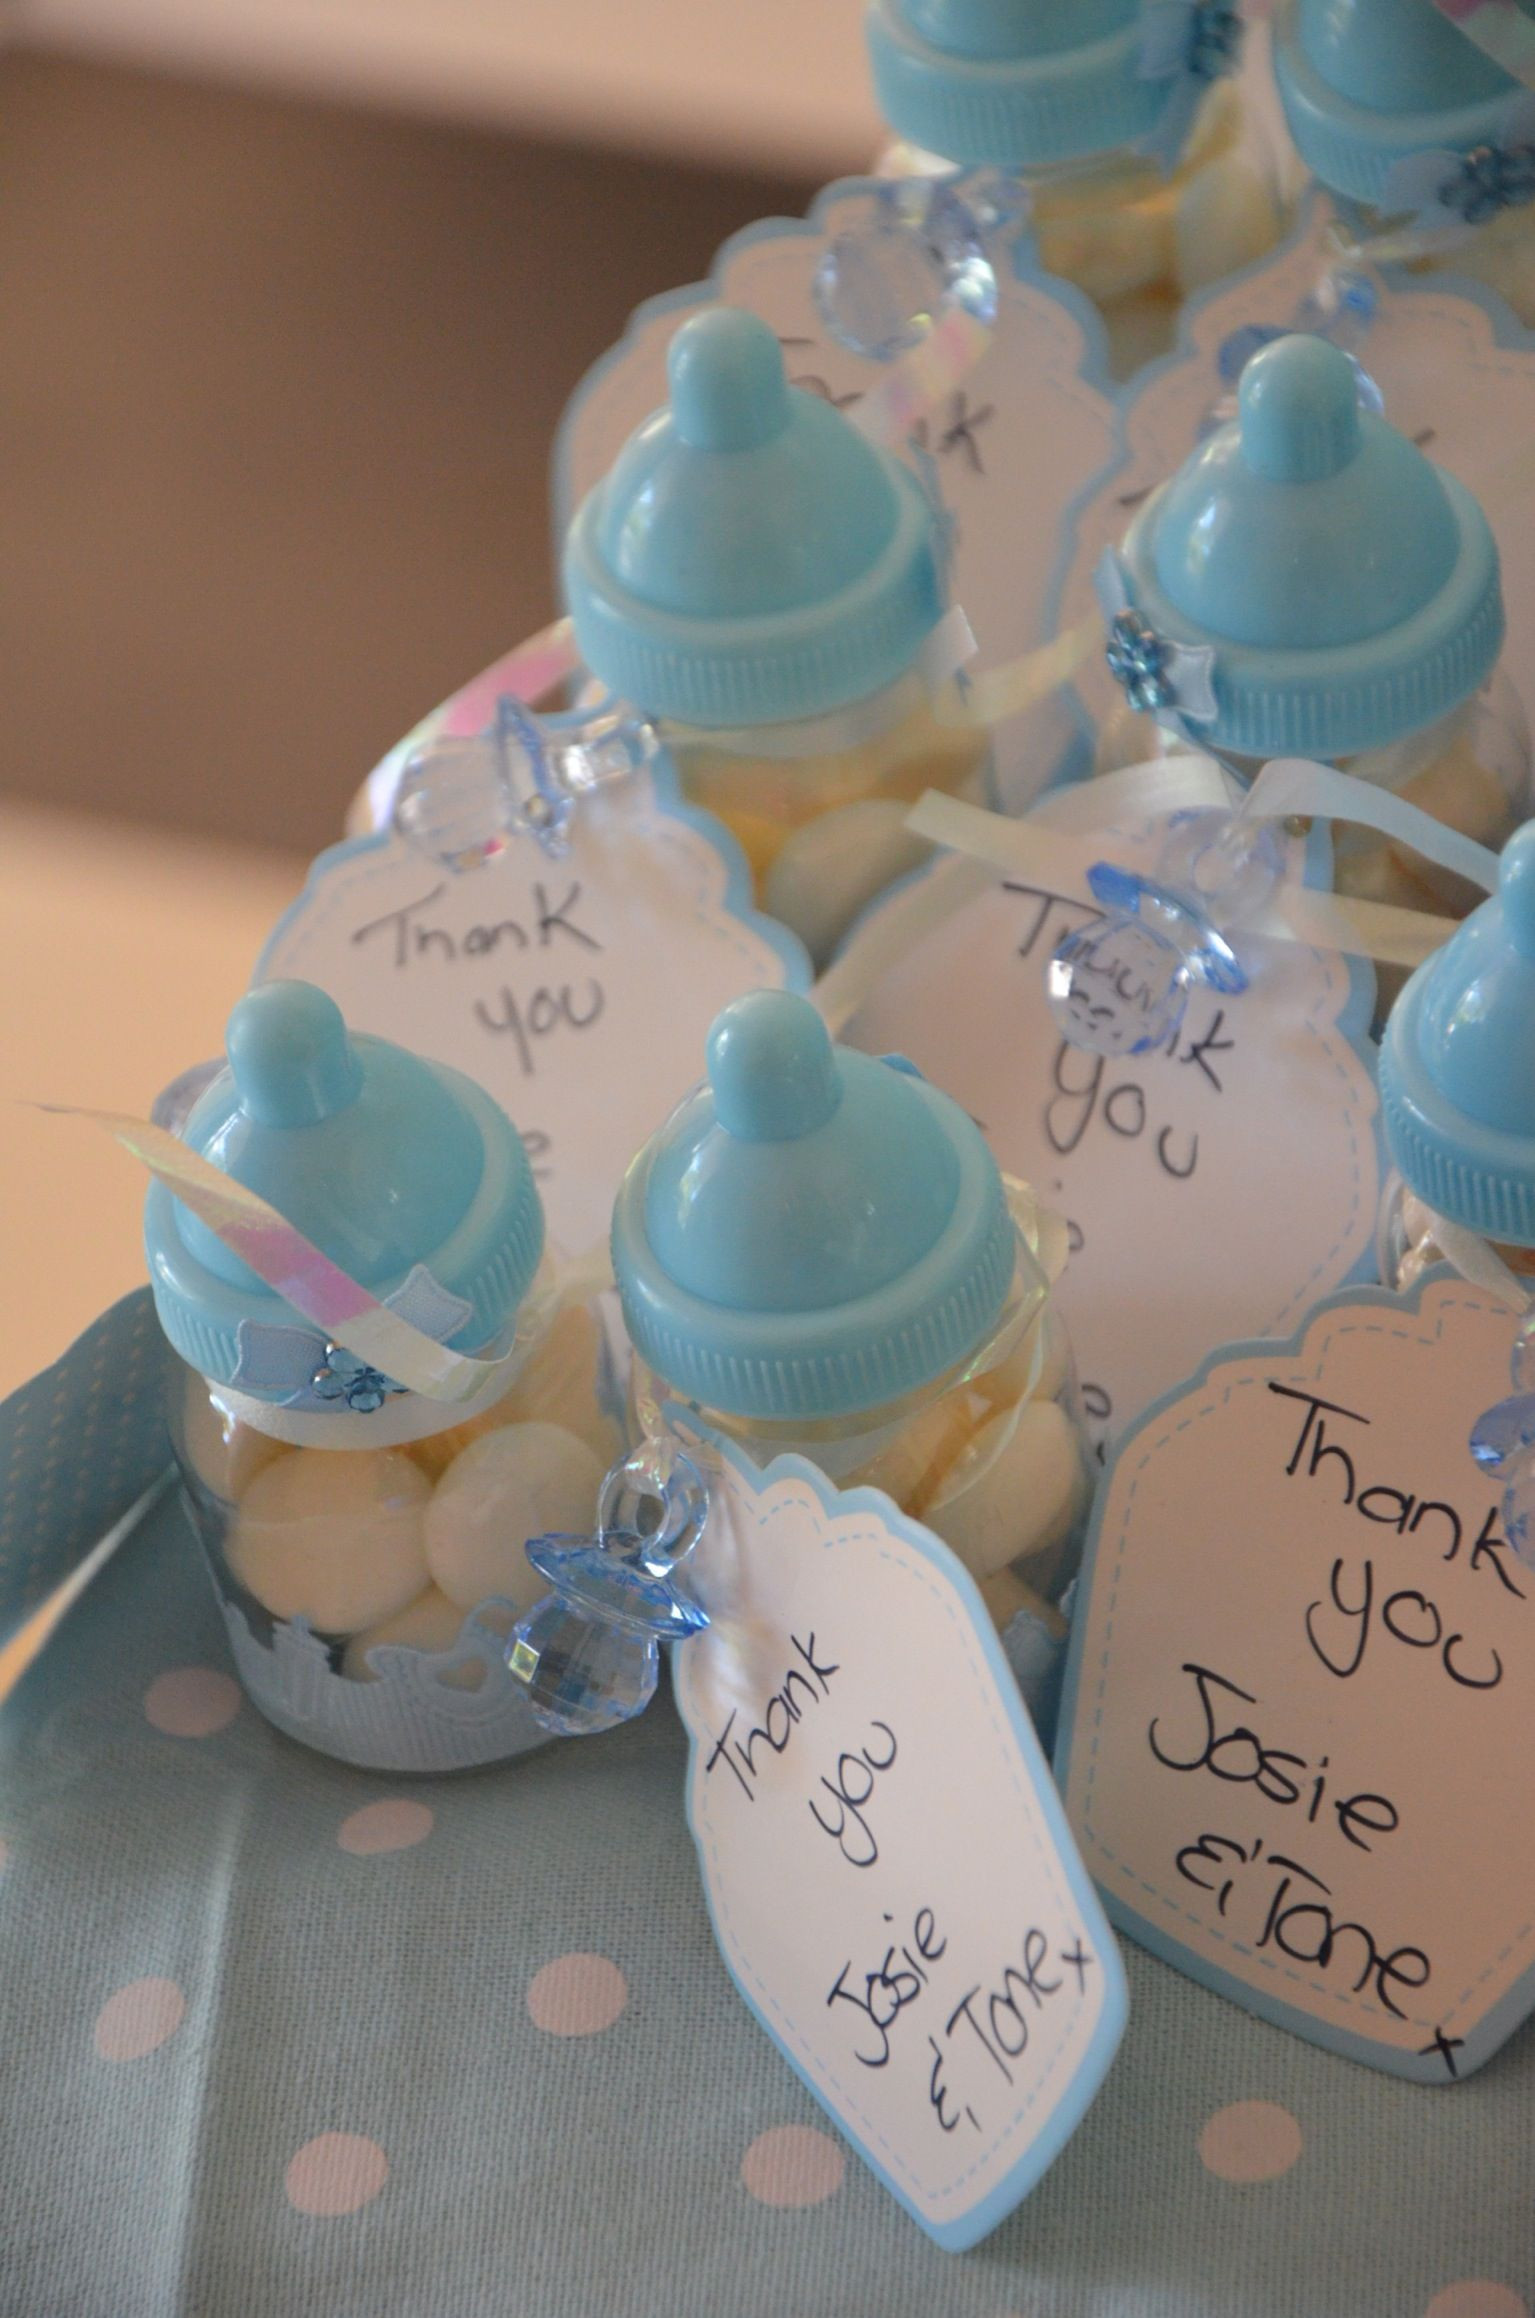 Thank You Gift Ideas For Baby Shower Host
 Thank you t for guests